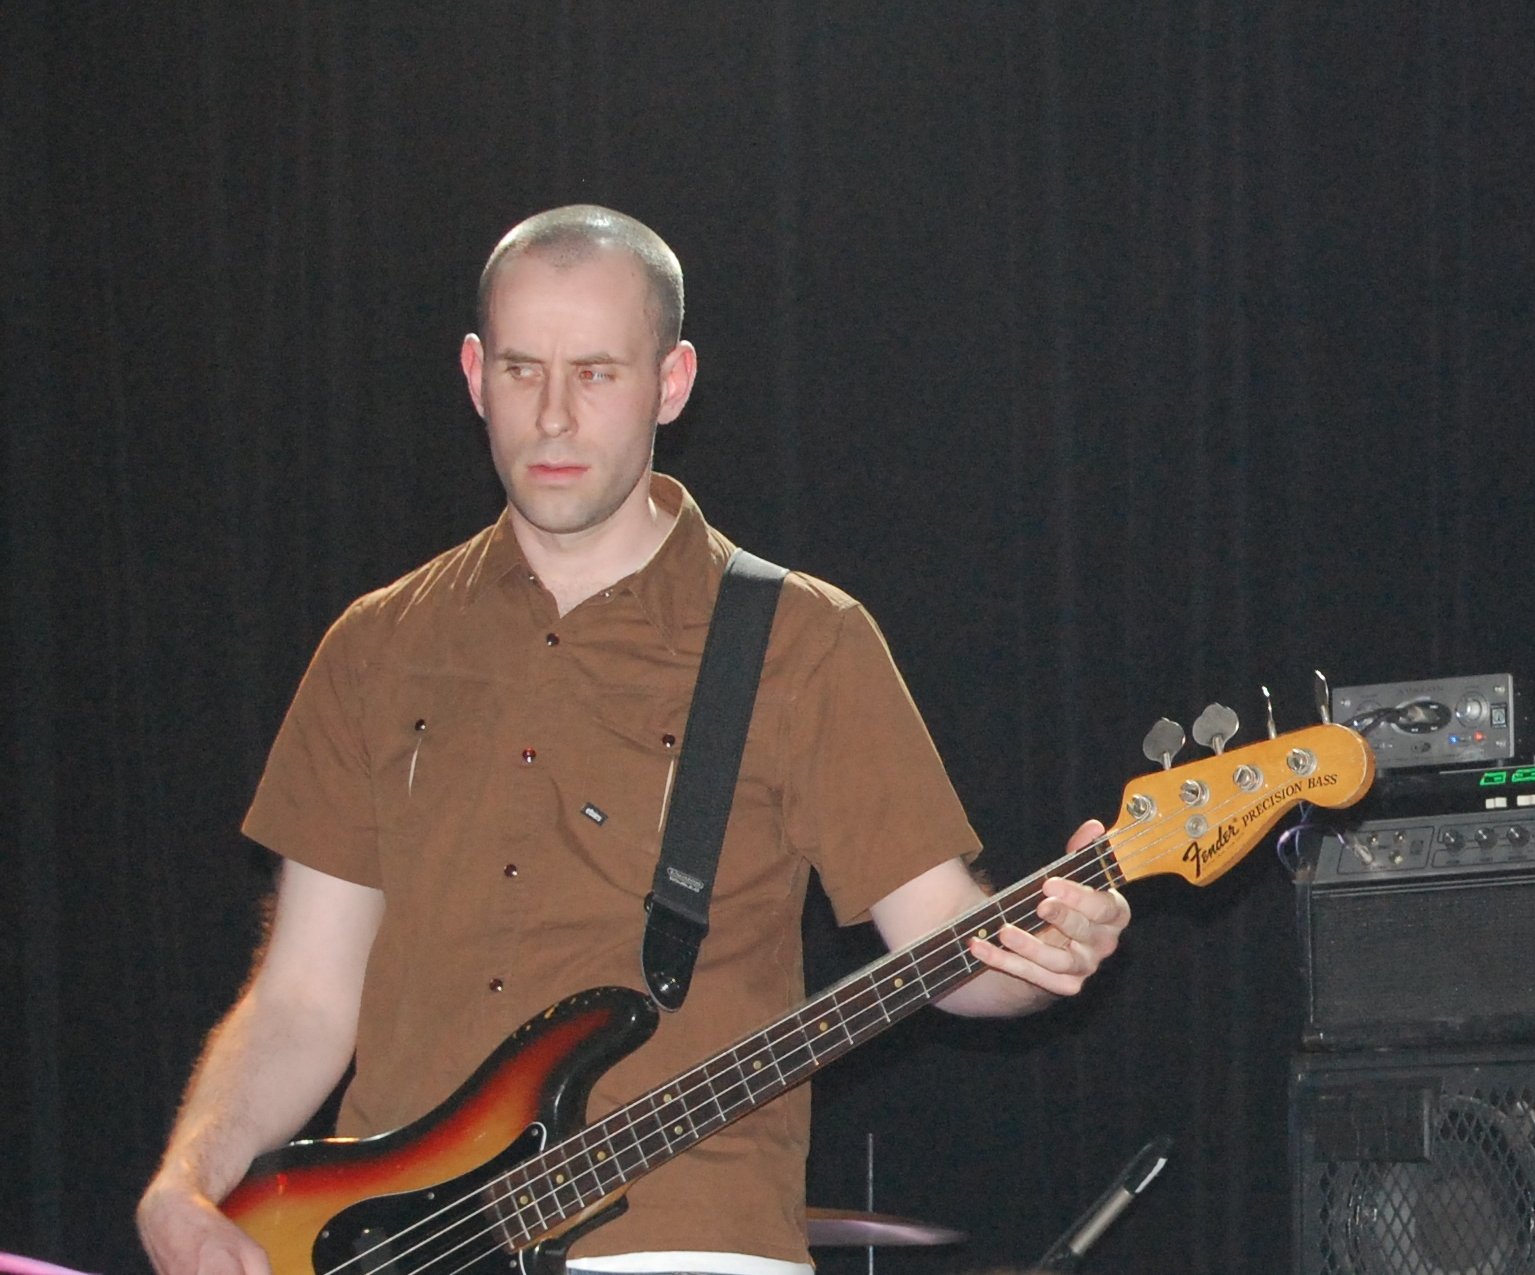 a man holding up a guitar and wearing a brown shirt